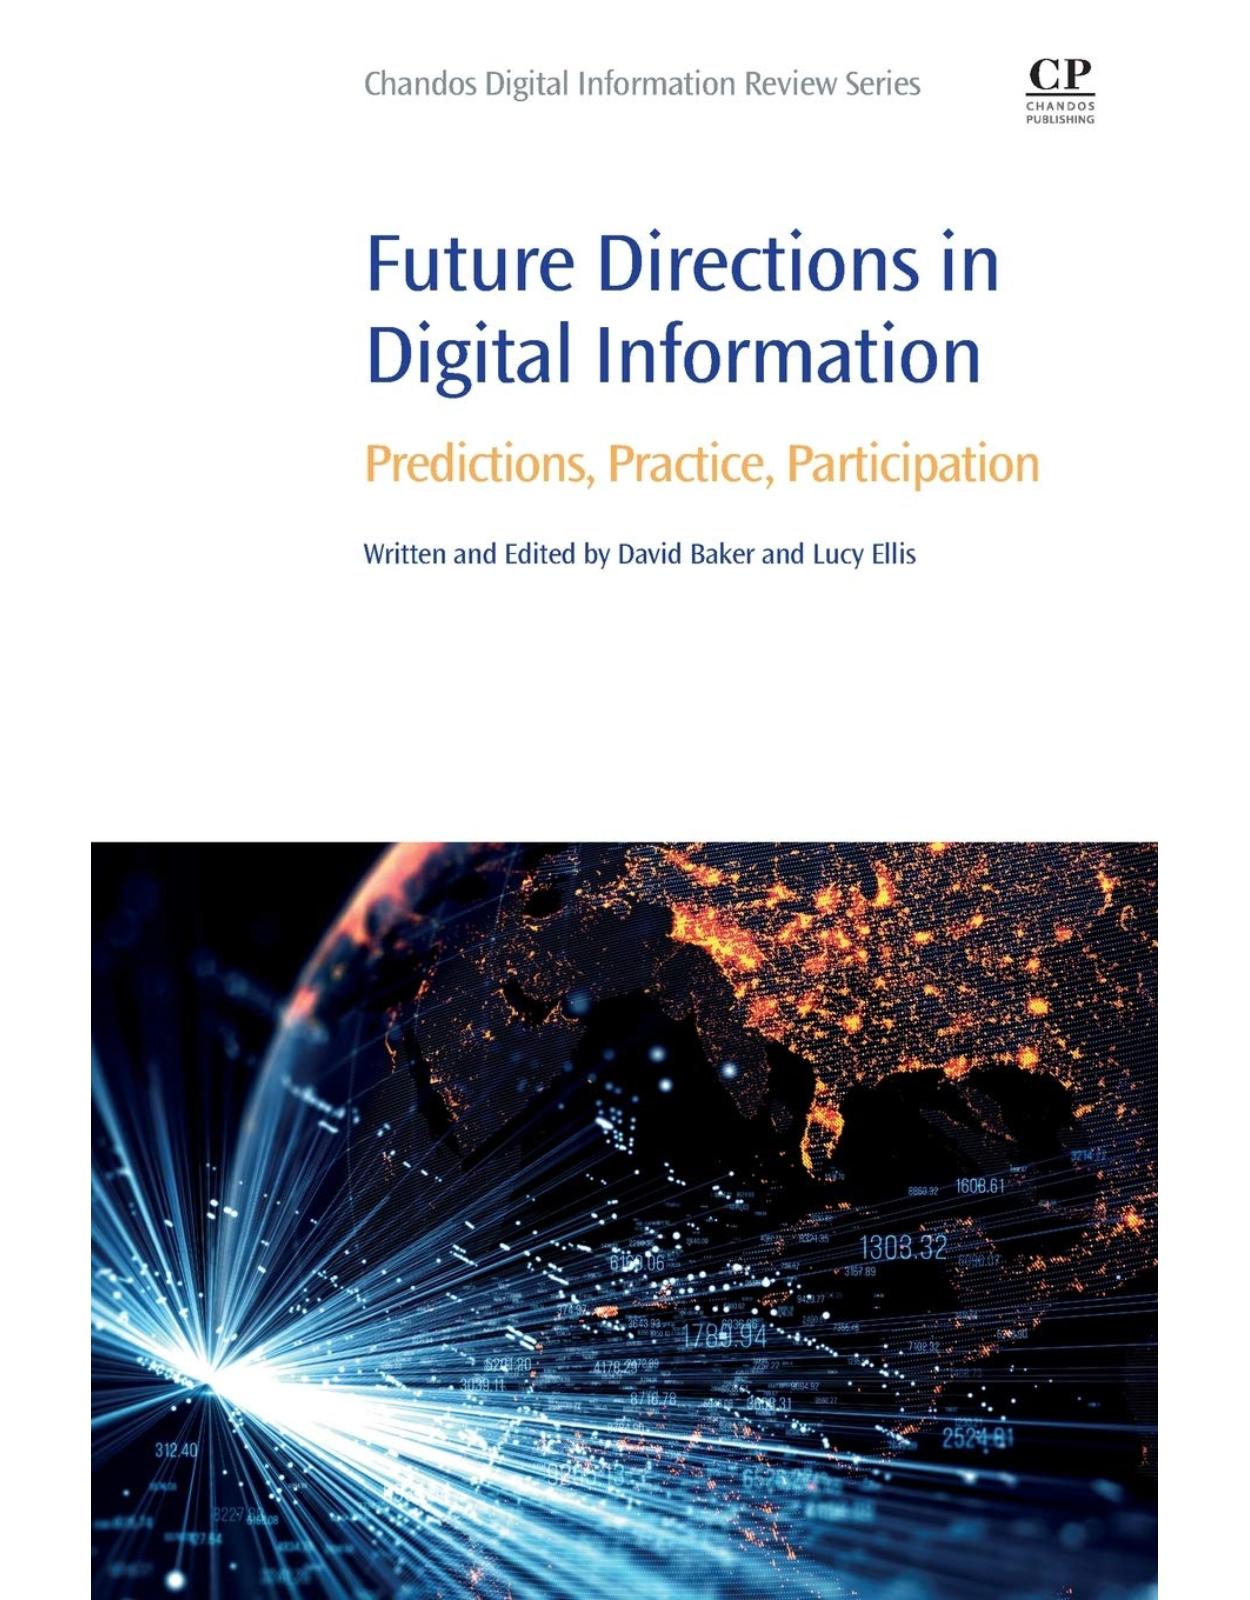 Future Directions in Digital Information: Predictions, Practice, Participation